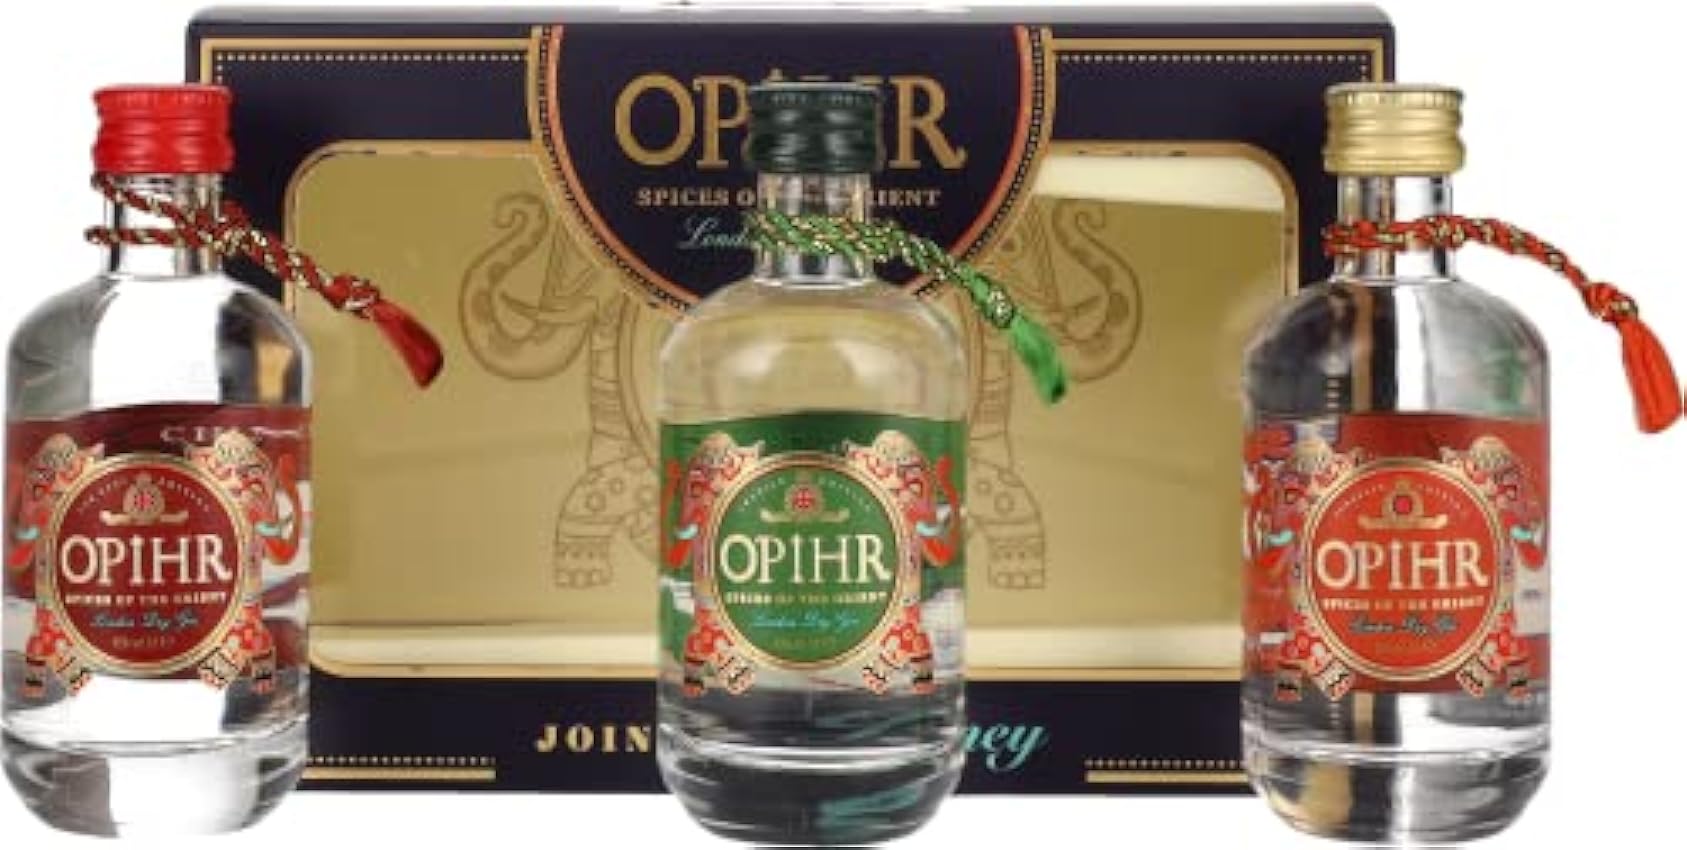 Opihr Gin SPICES OF THE ORIENT London Dry Gin Miniset 4